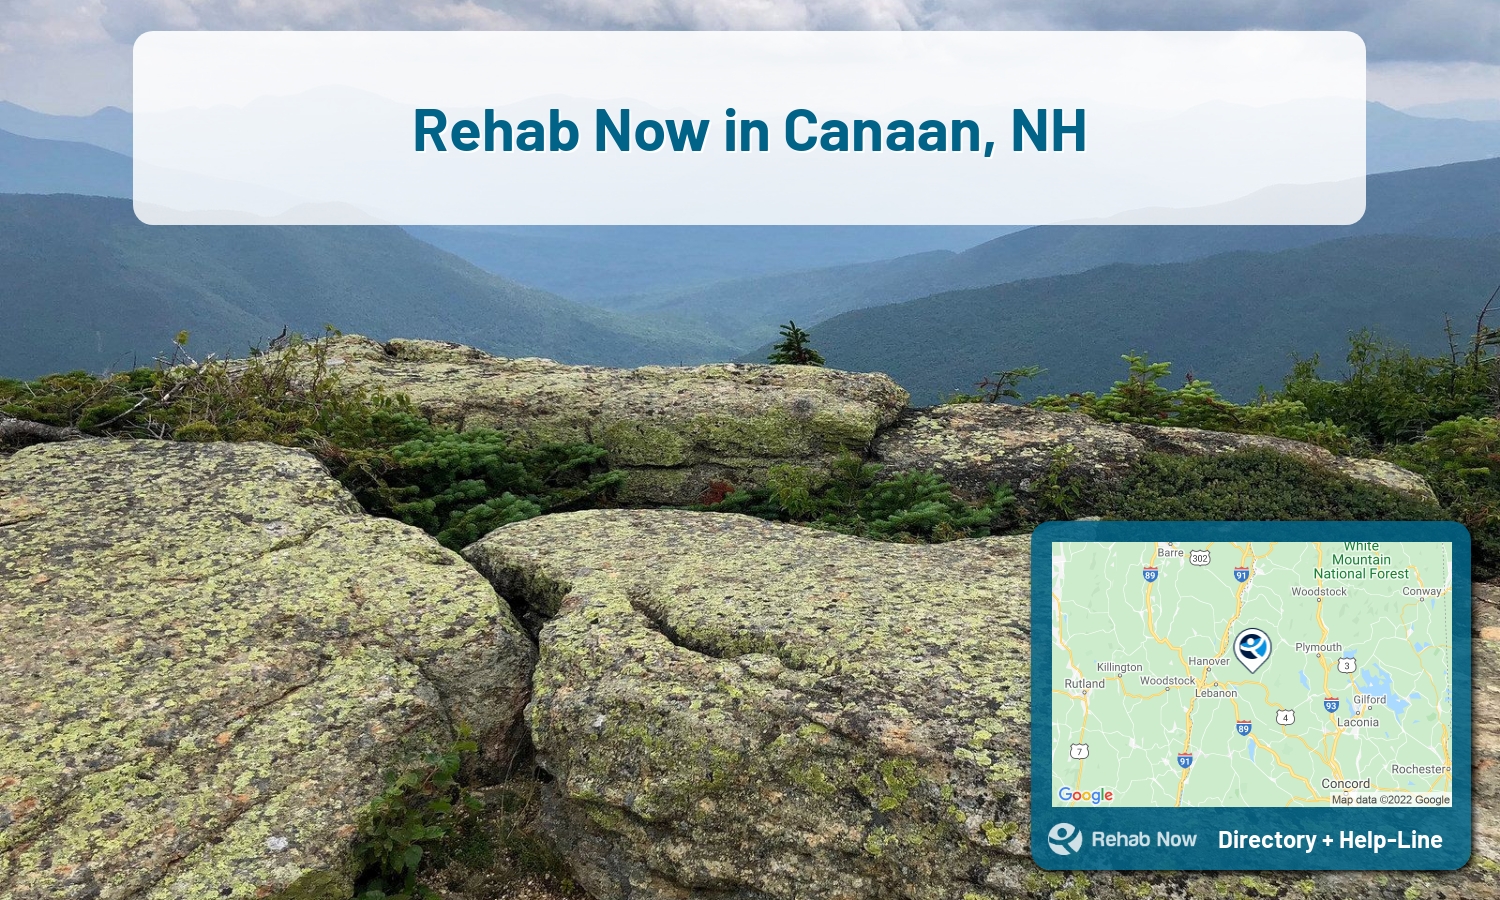 Let our expert counselors help find the best addiction treatment in Canaan, New Hampshire now with a free call to our hotline.